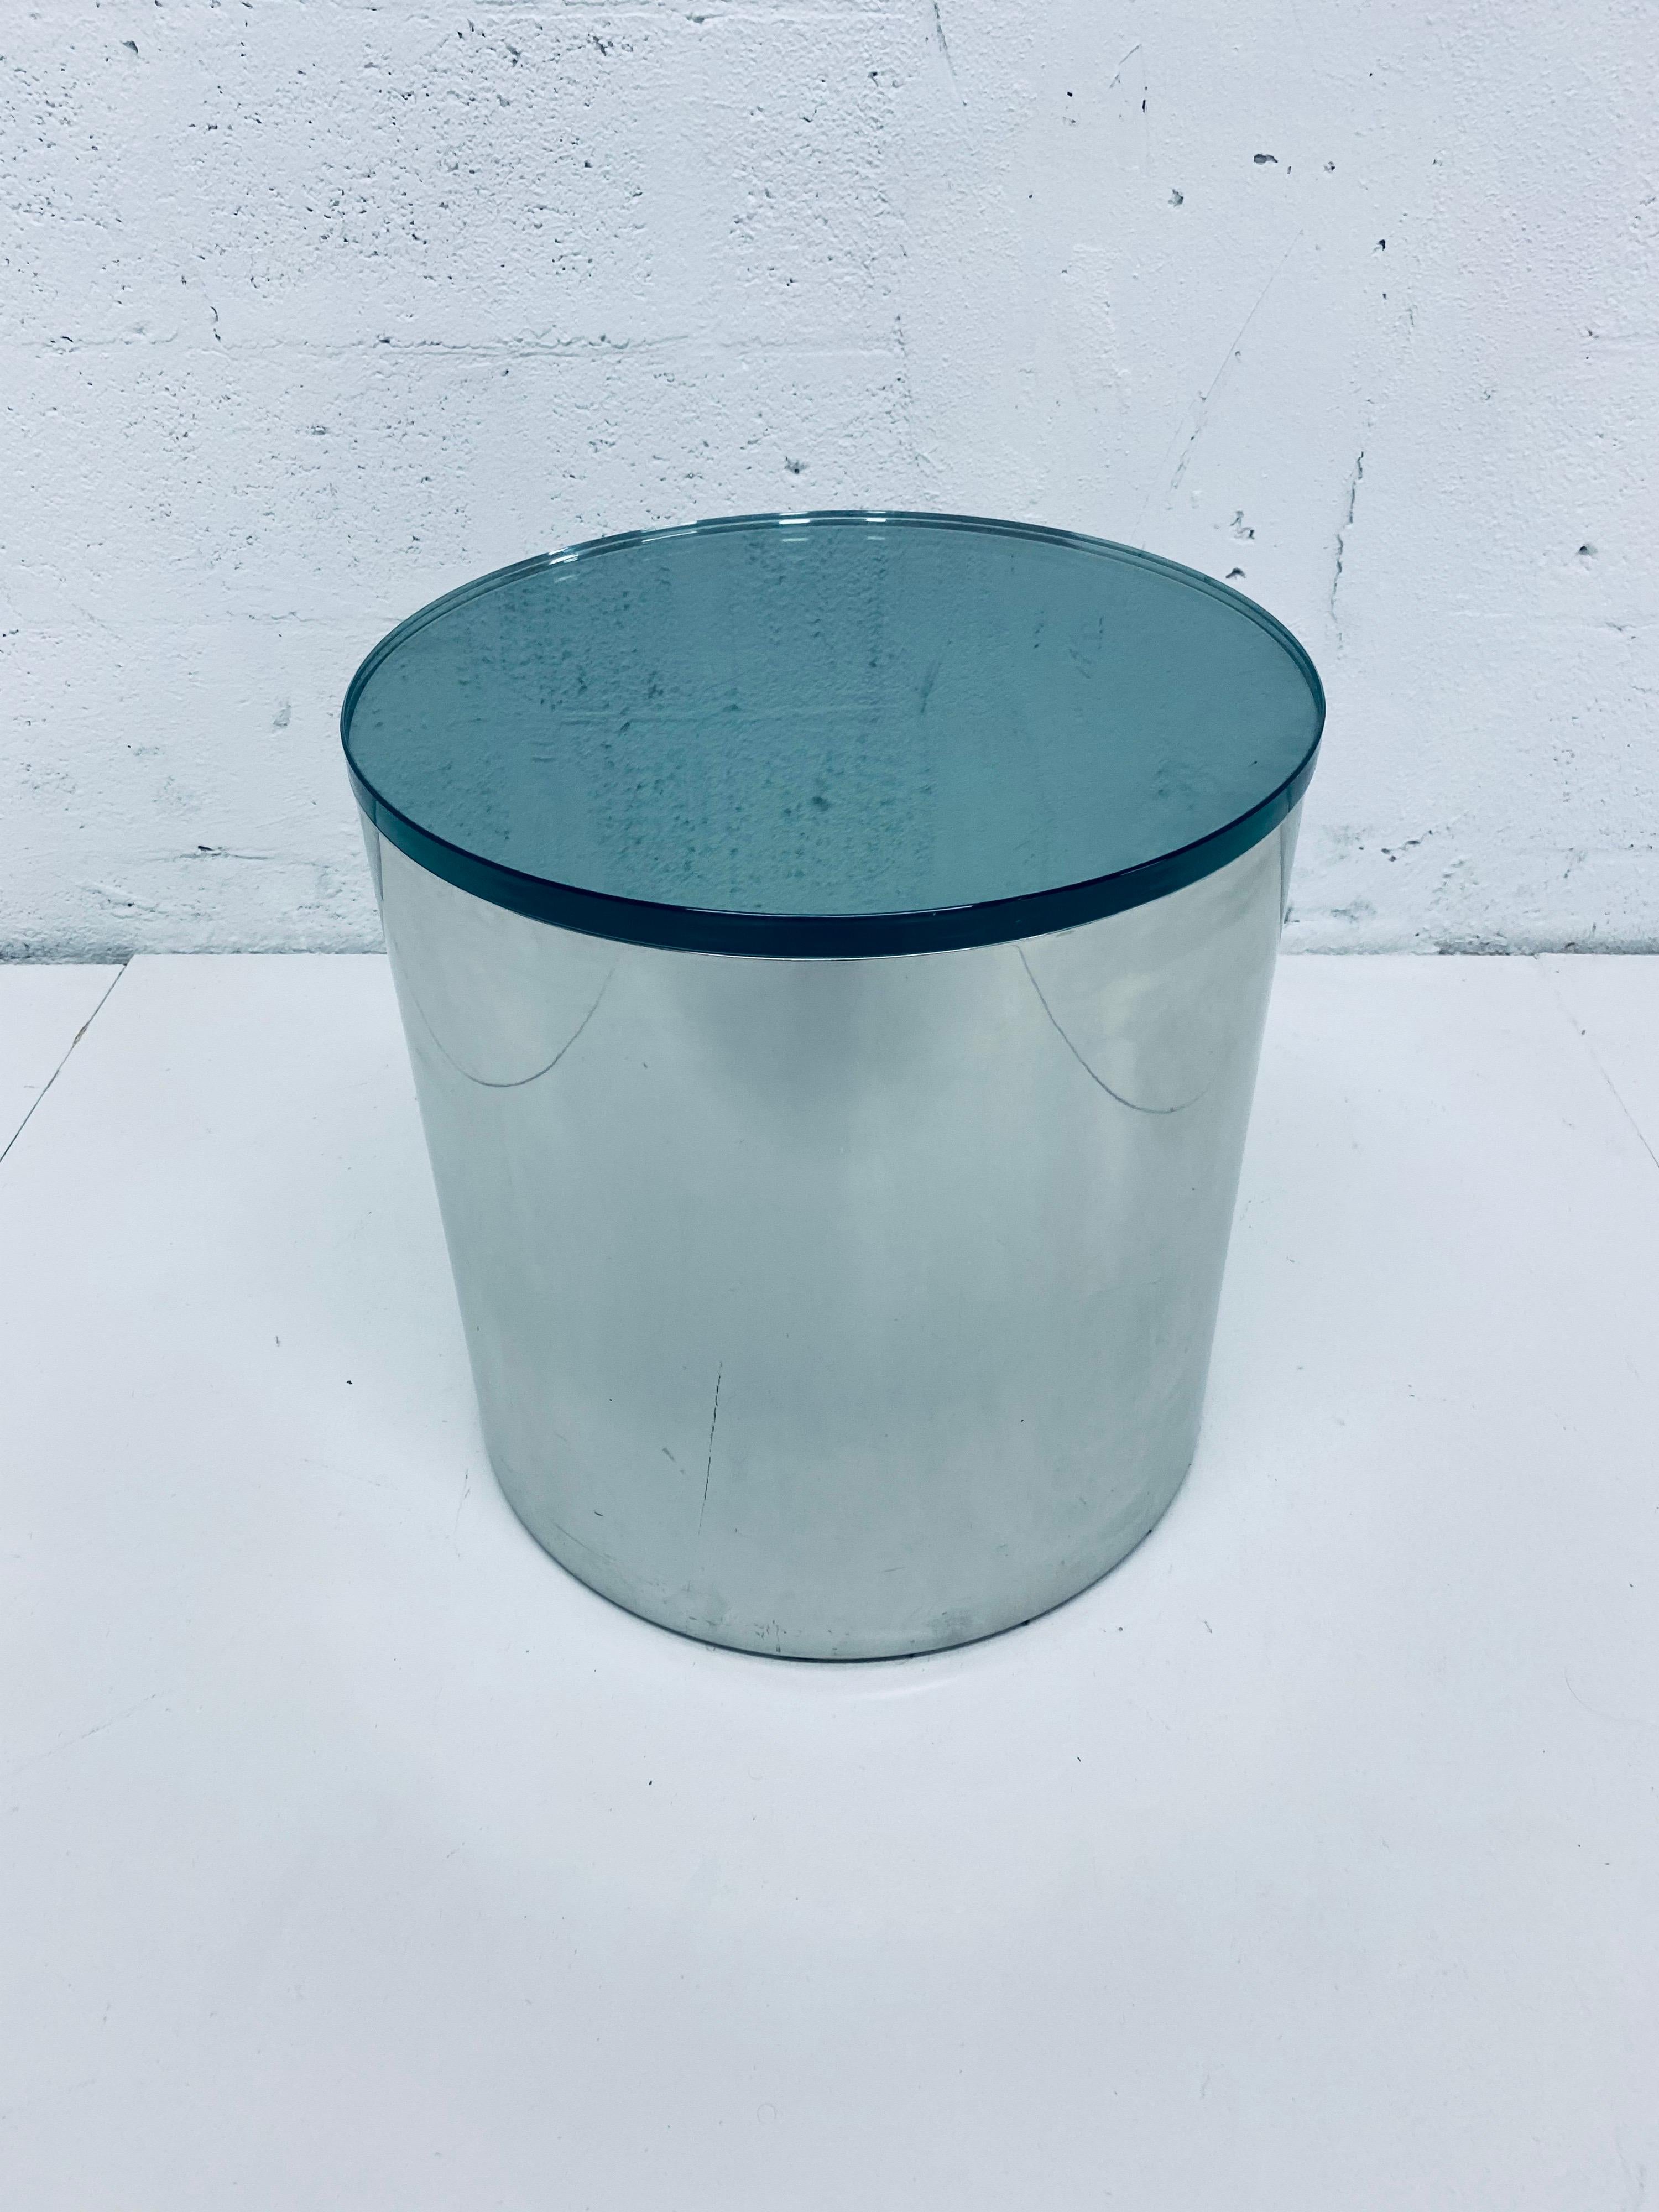 Paul Mayen Polished Steel and Glass Side Table for Habitat, 1970s For Sale 11